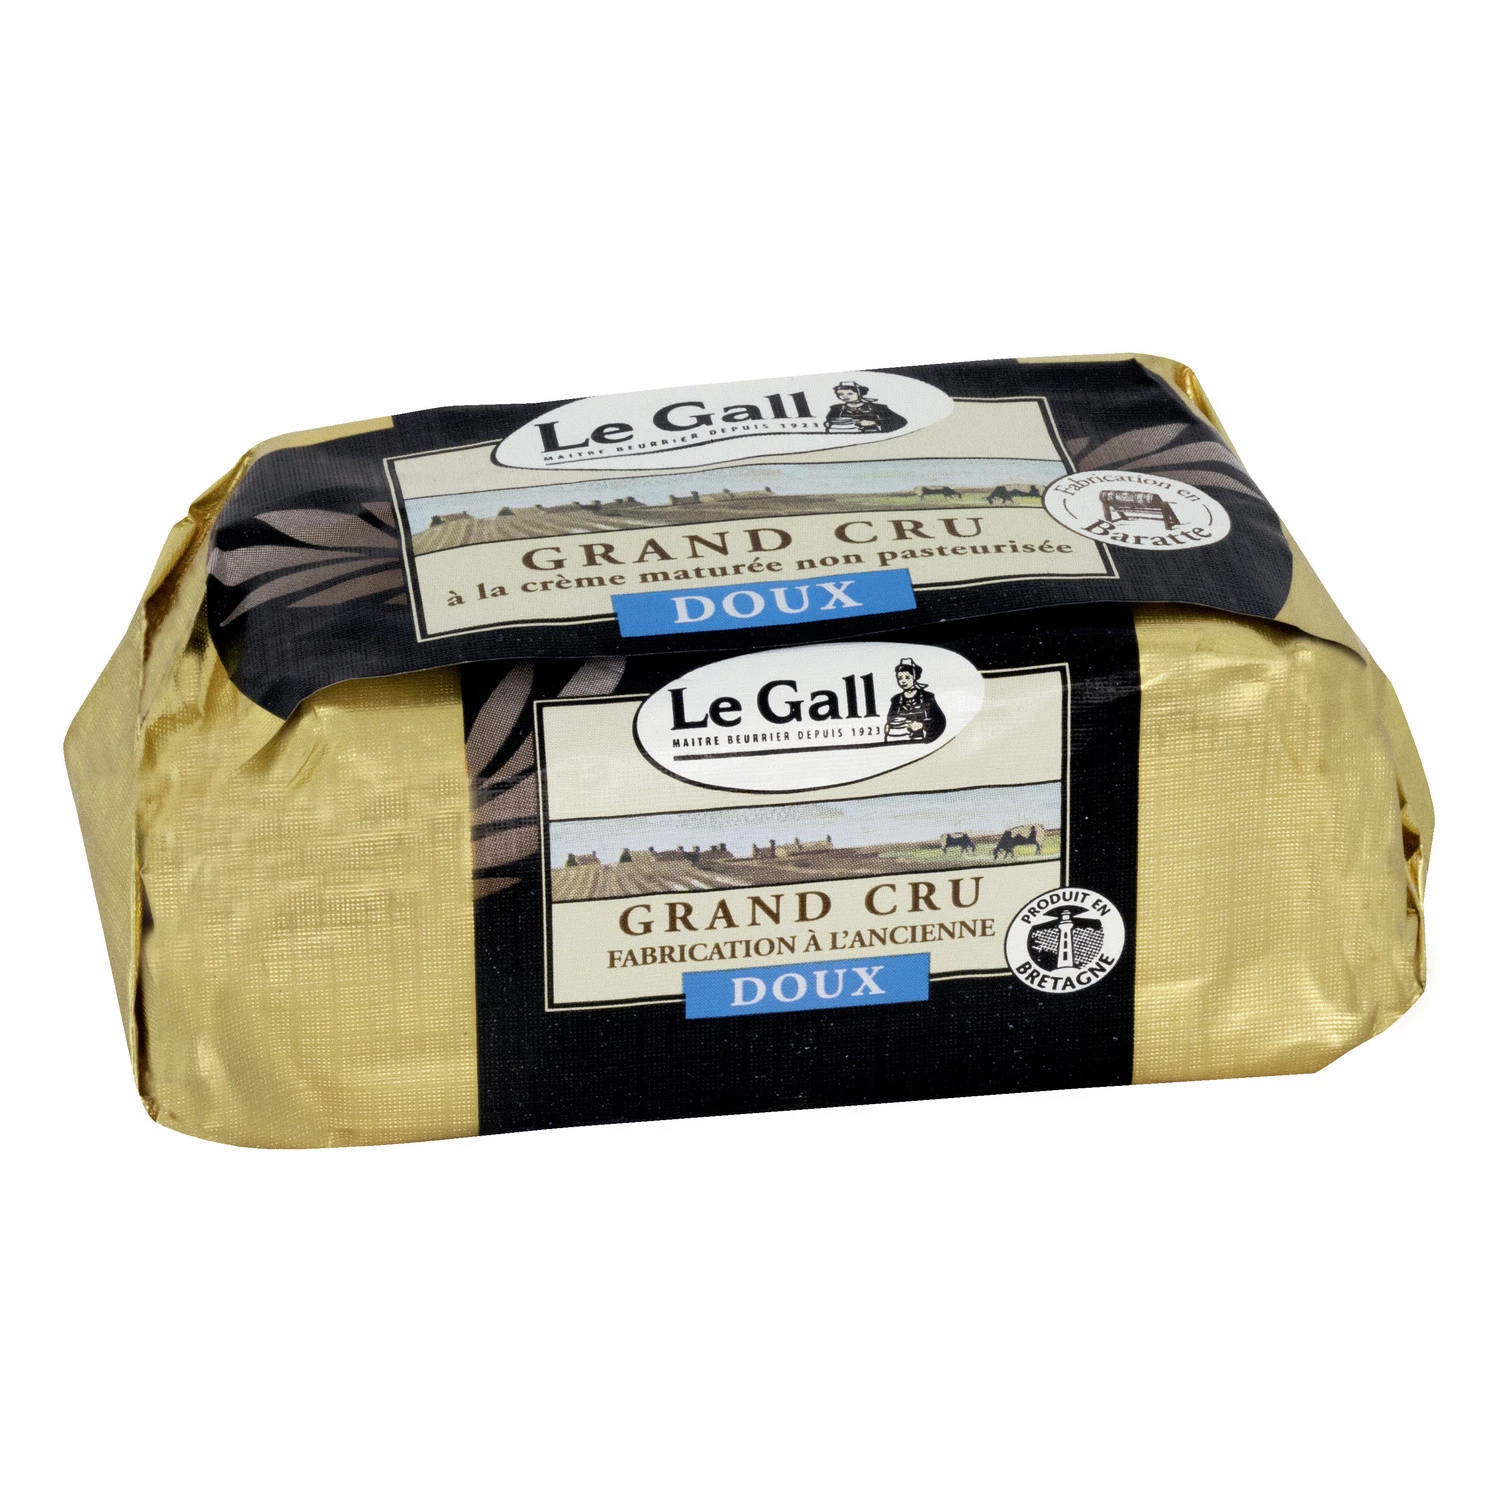 Le Gall Baratte RAW butter unsalted 250g